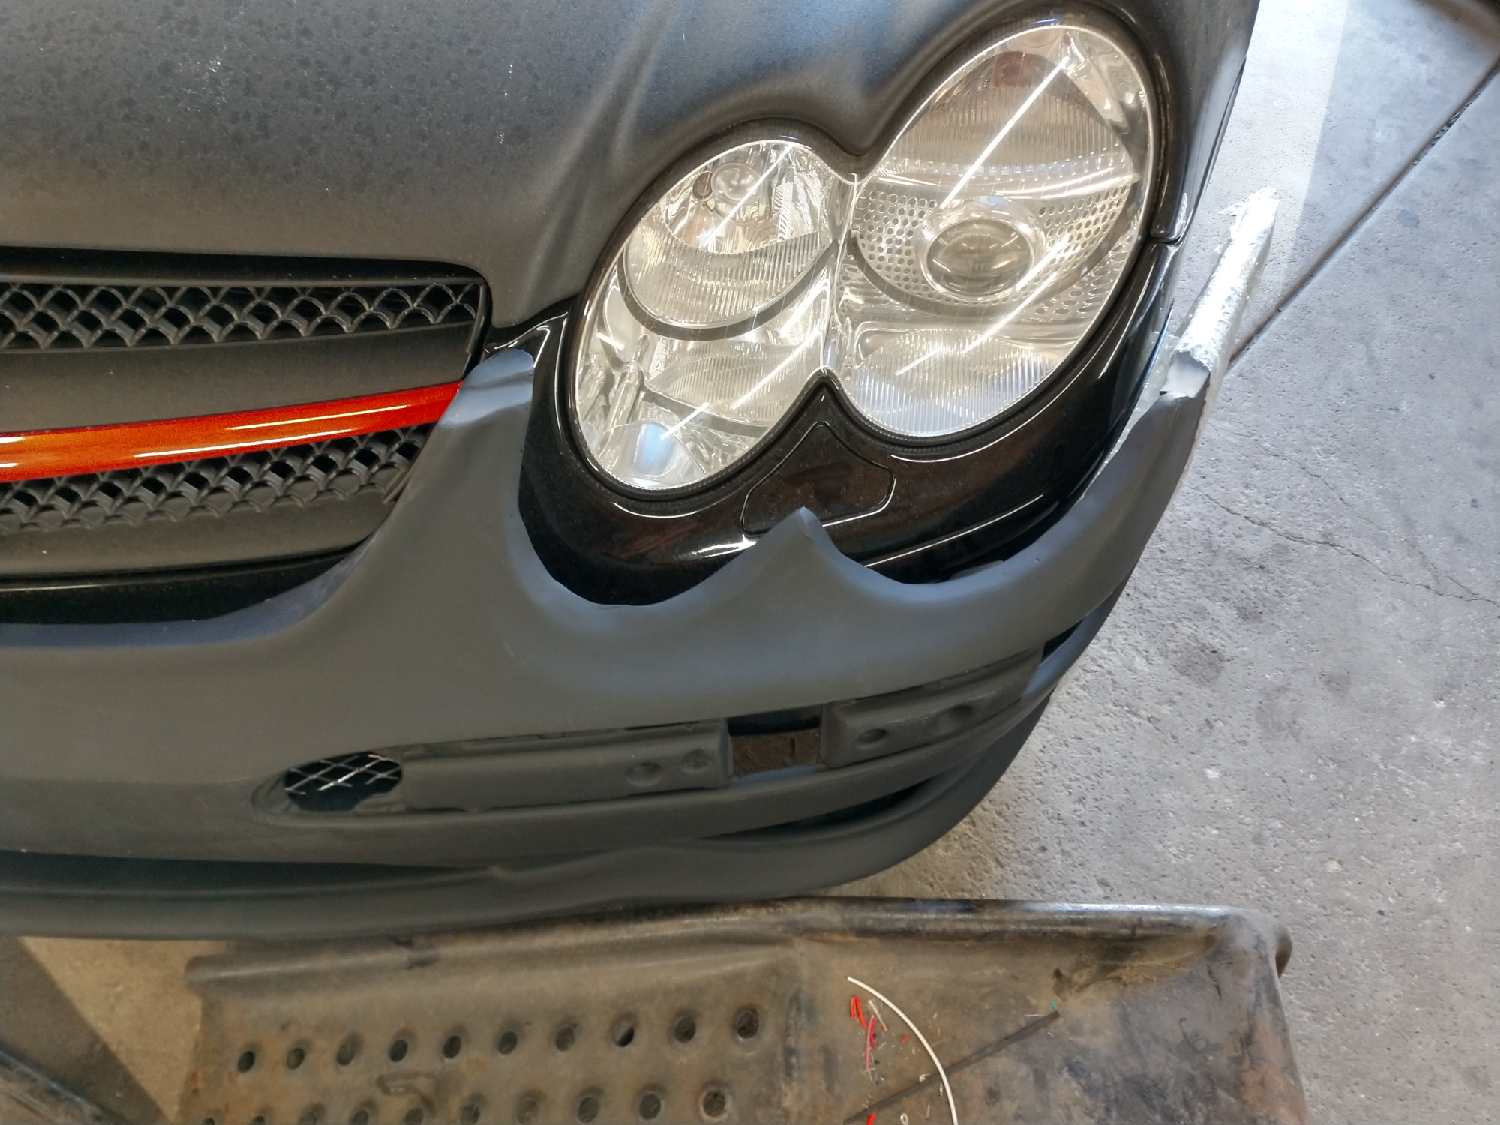 Bumper doesn't line up with lights